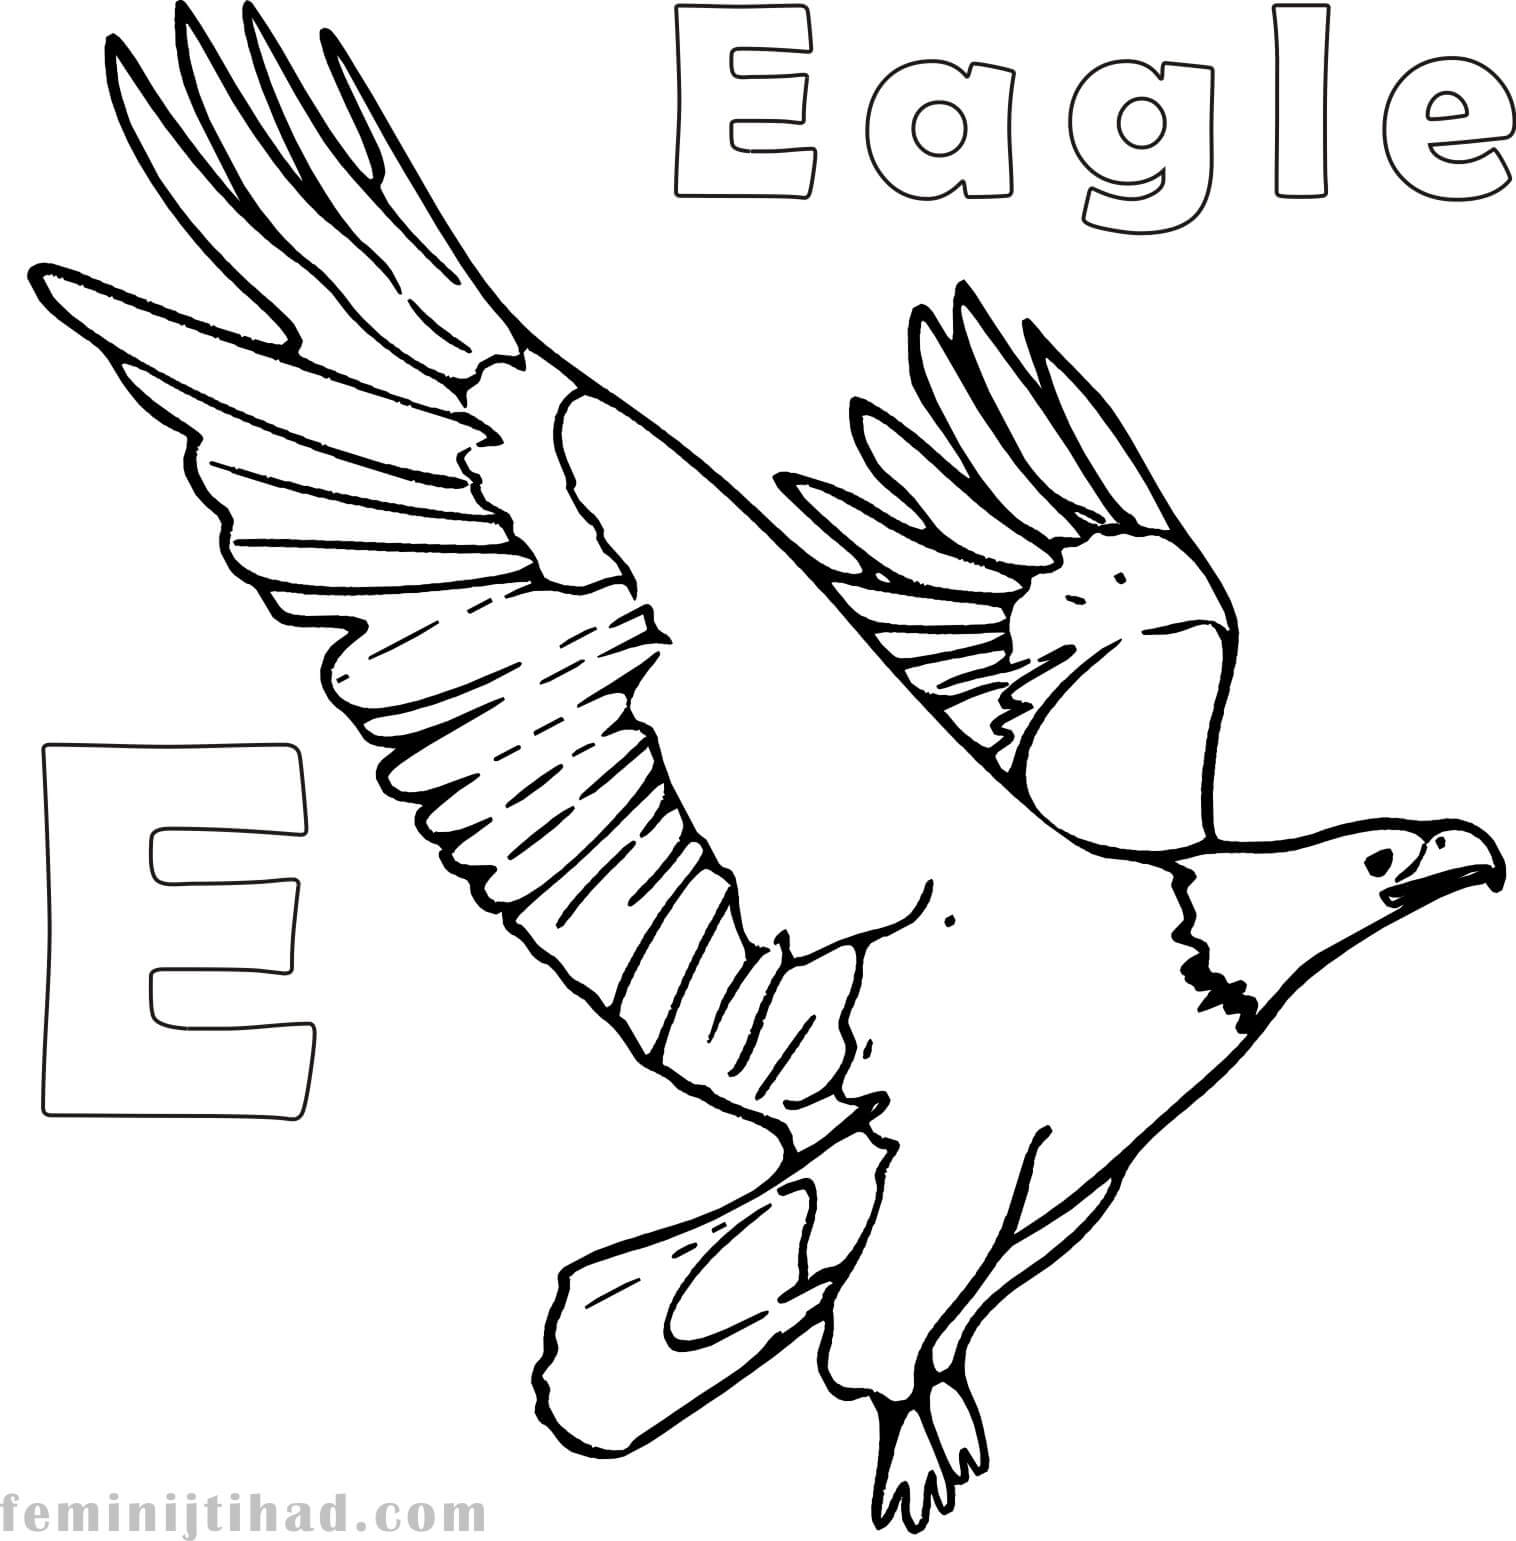 coloring page of an eagle flying